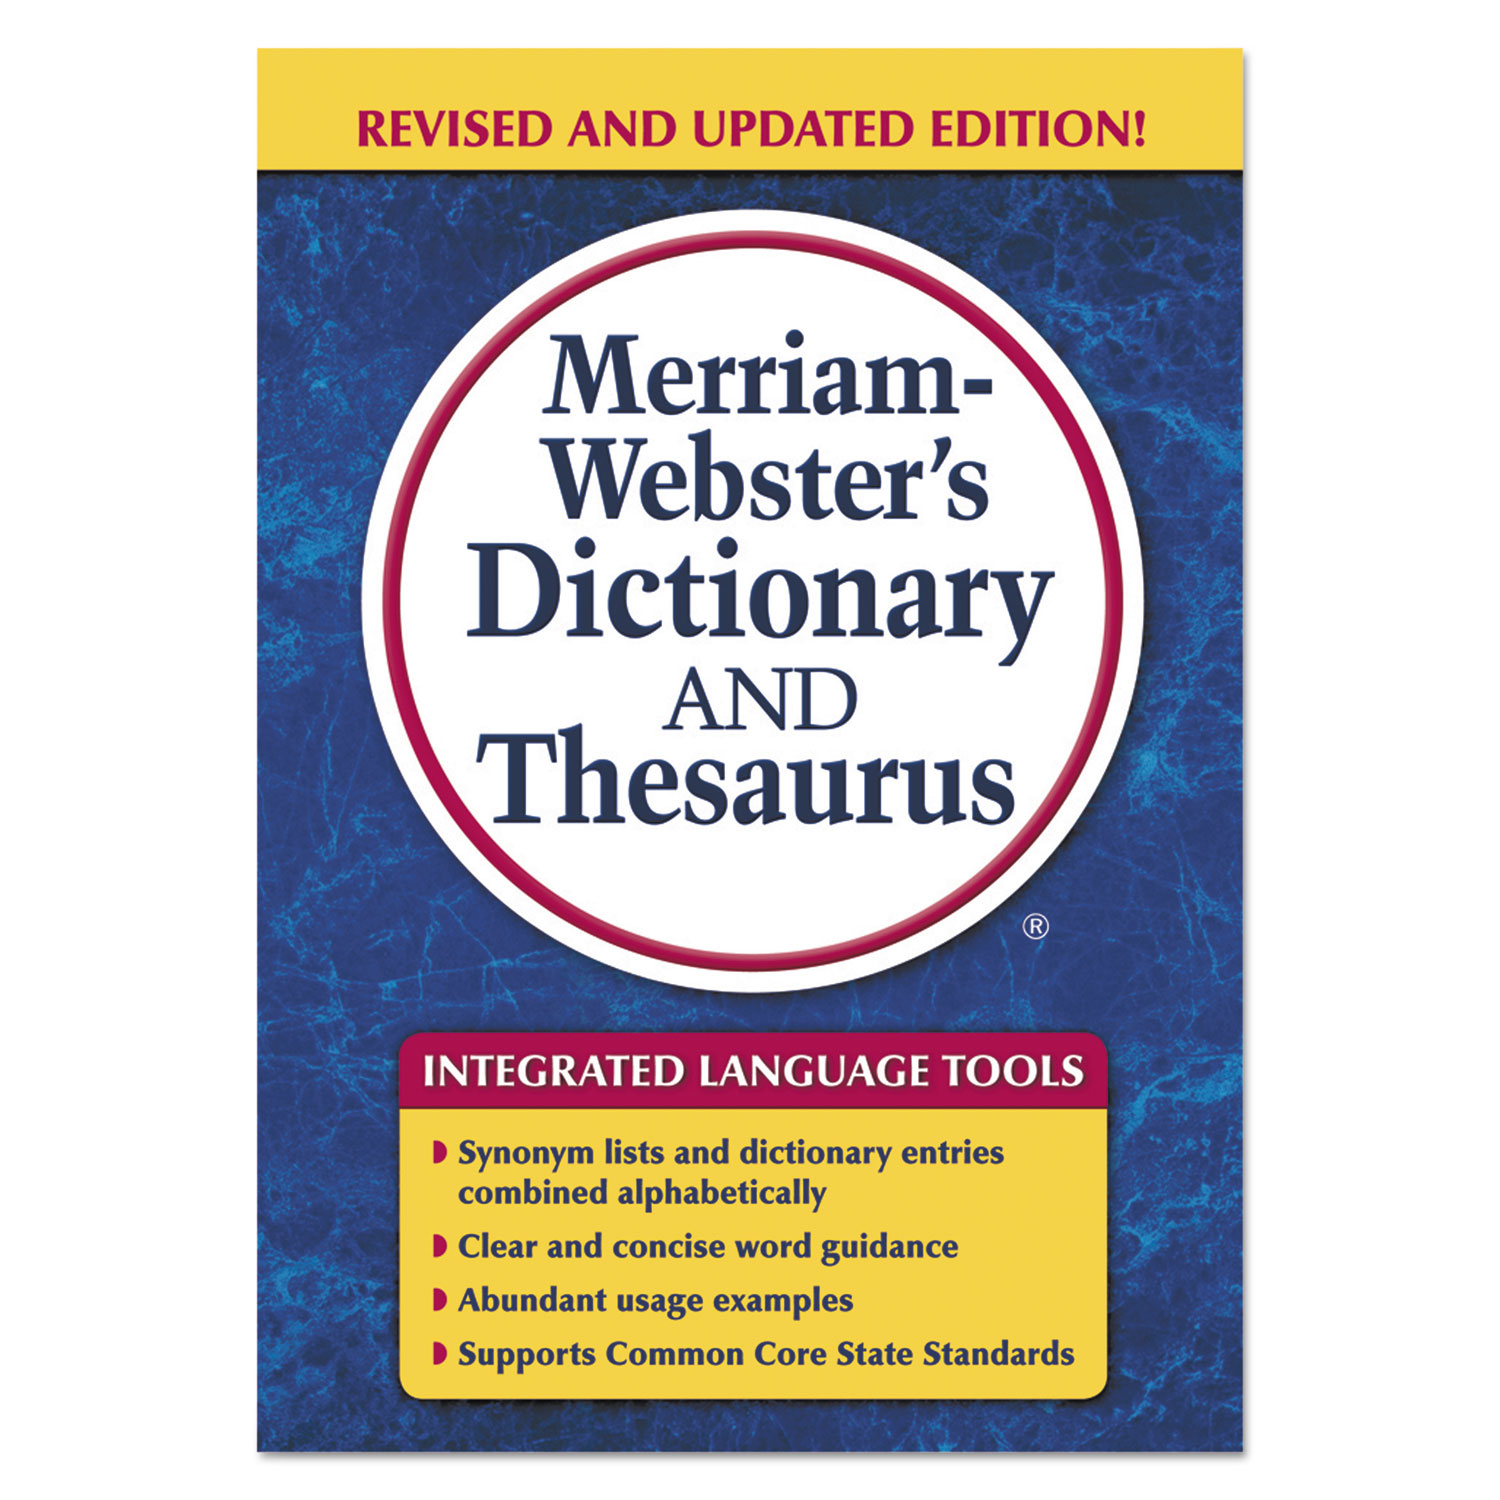 Merriam-Websters Dictionary and Thesaurus, 992 Pages